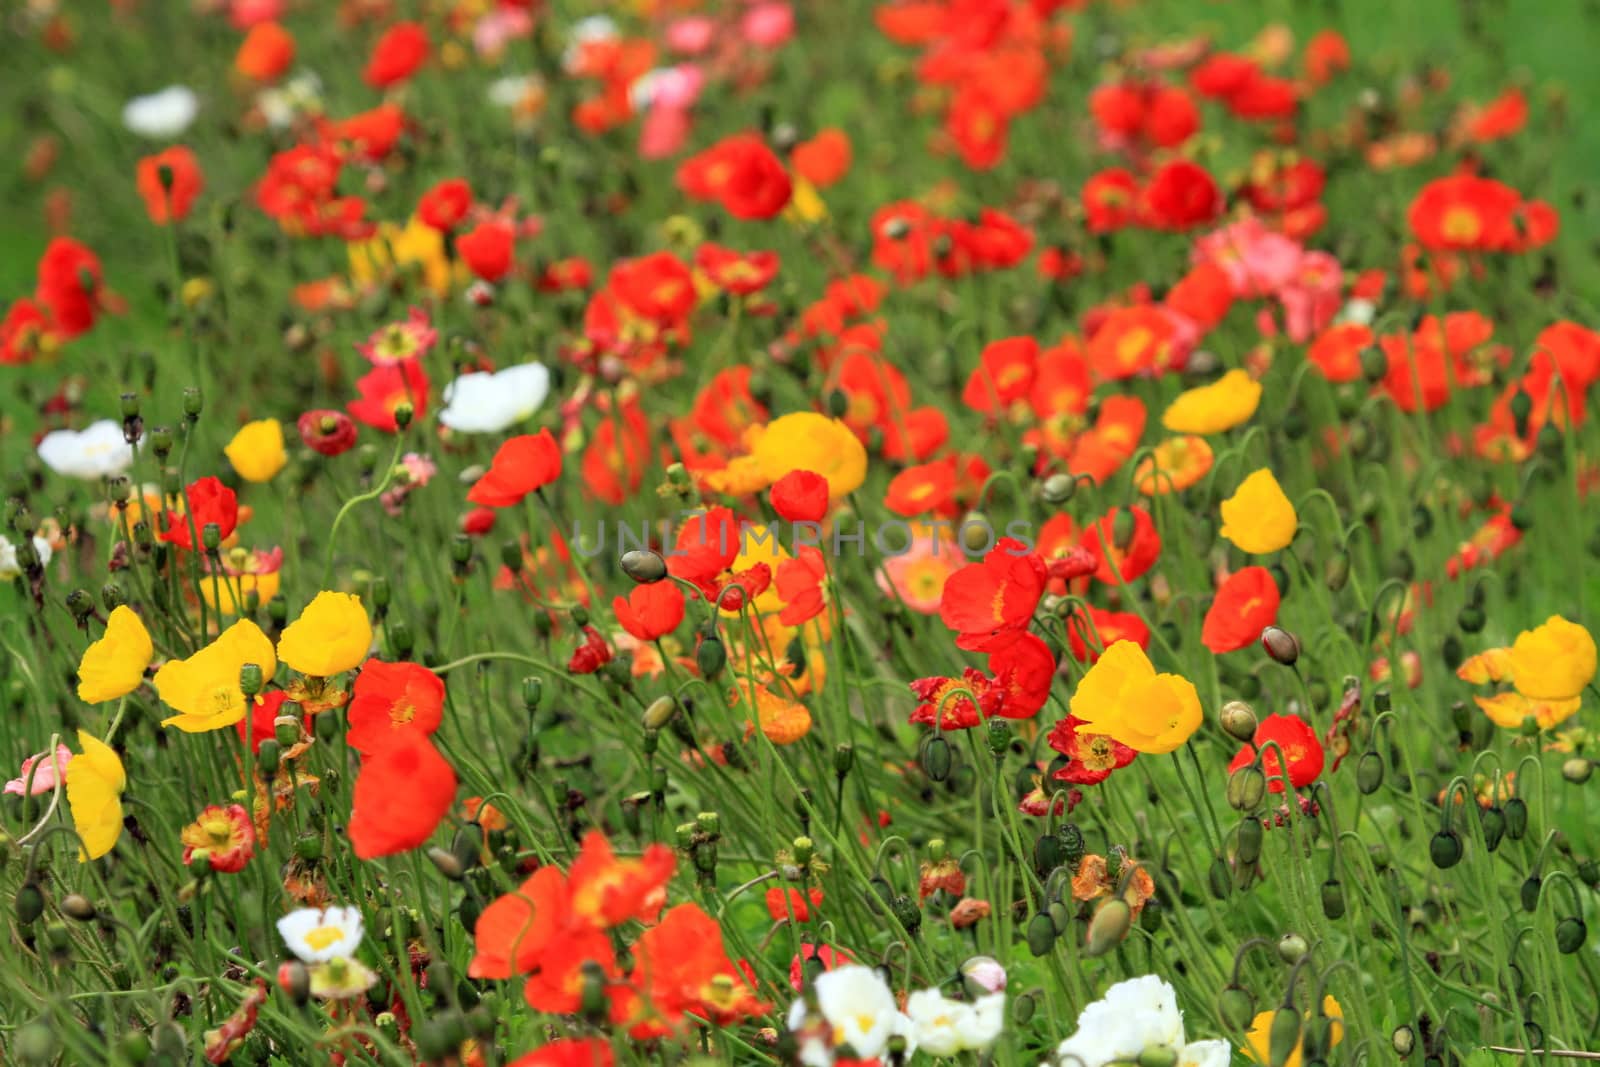 Colorful poppies and other yellow and white flowers as a background